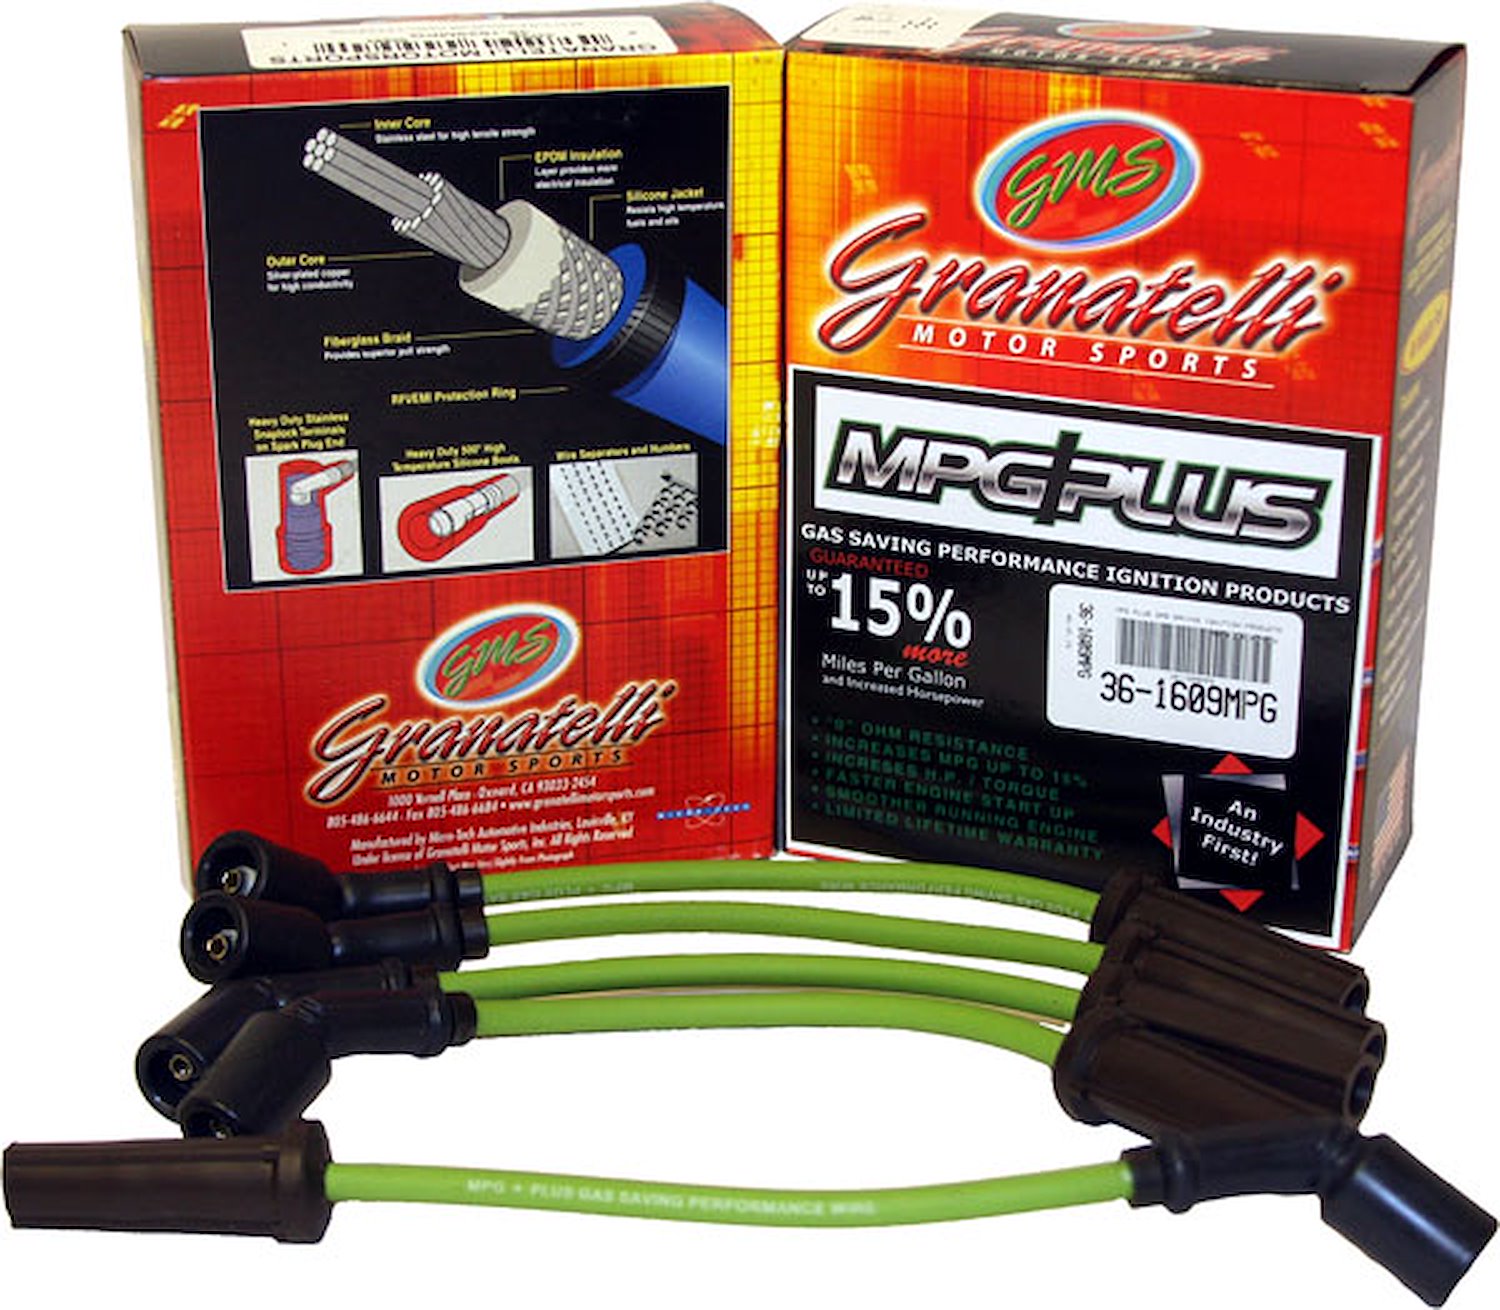 MPG Wires HONDA PRELUDE 4CYL 2.3L 92-96